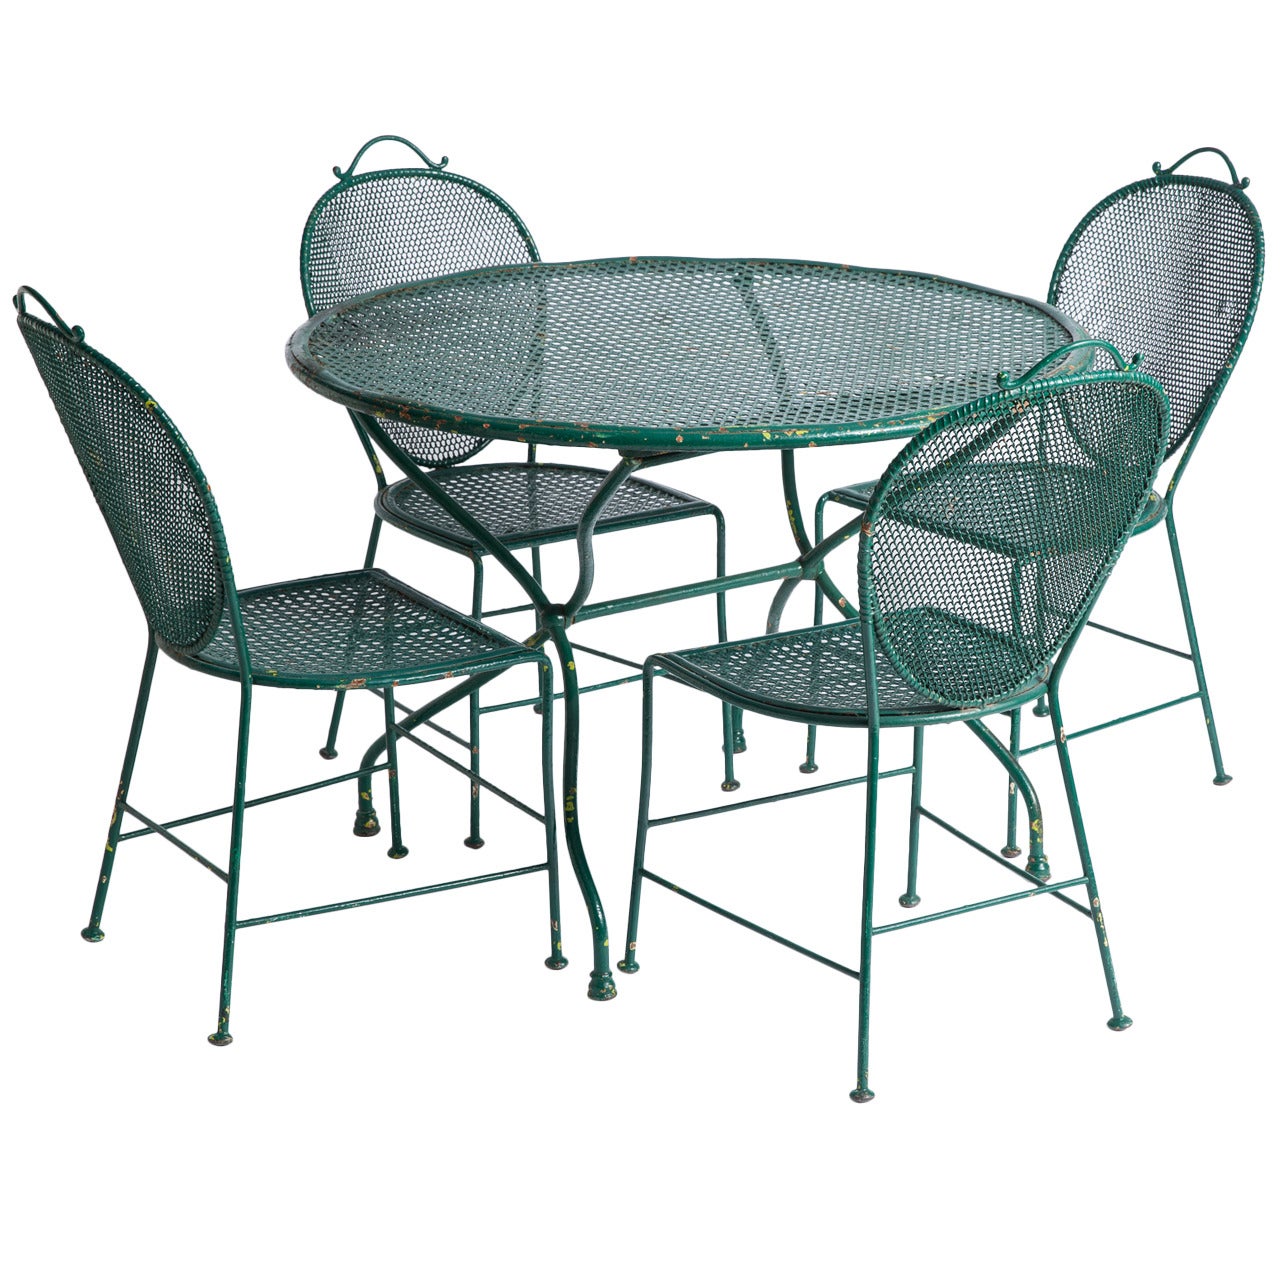 French Wrought Iron Garden Table and Chairs, circa 1900